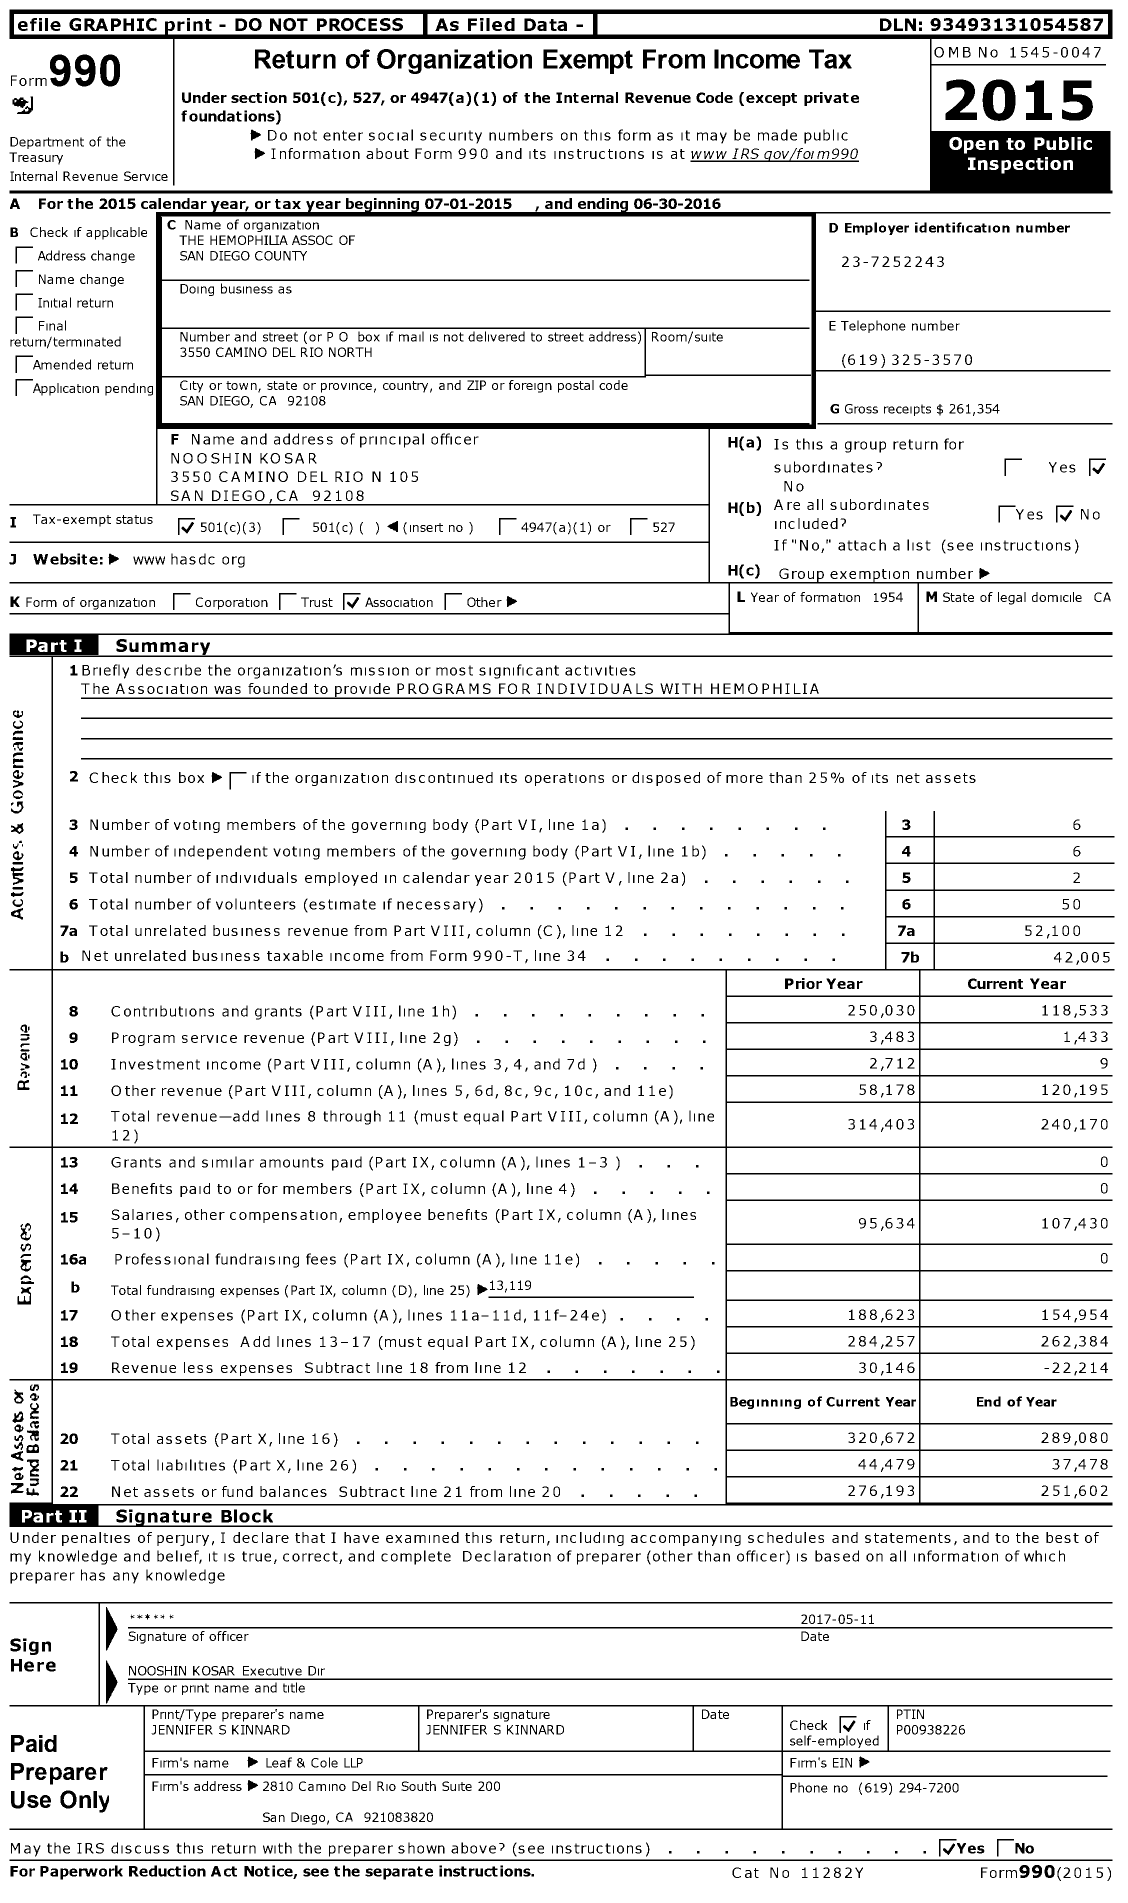 Image of first page of 2015 Form 990 for The Hemophilia Association of San Diego County